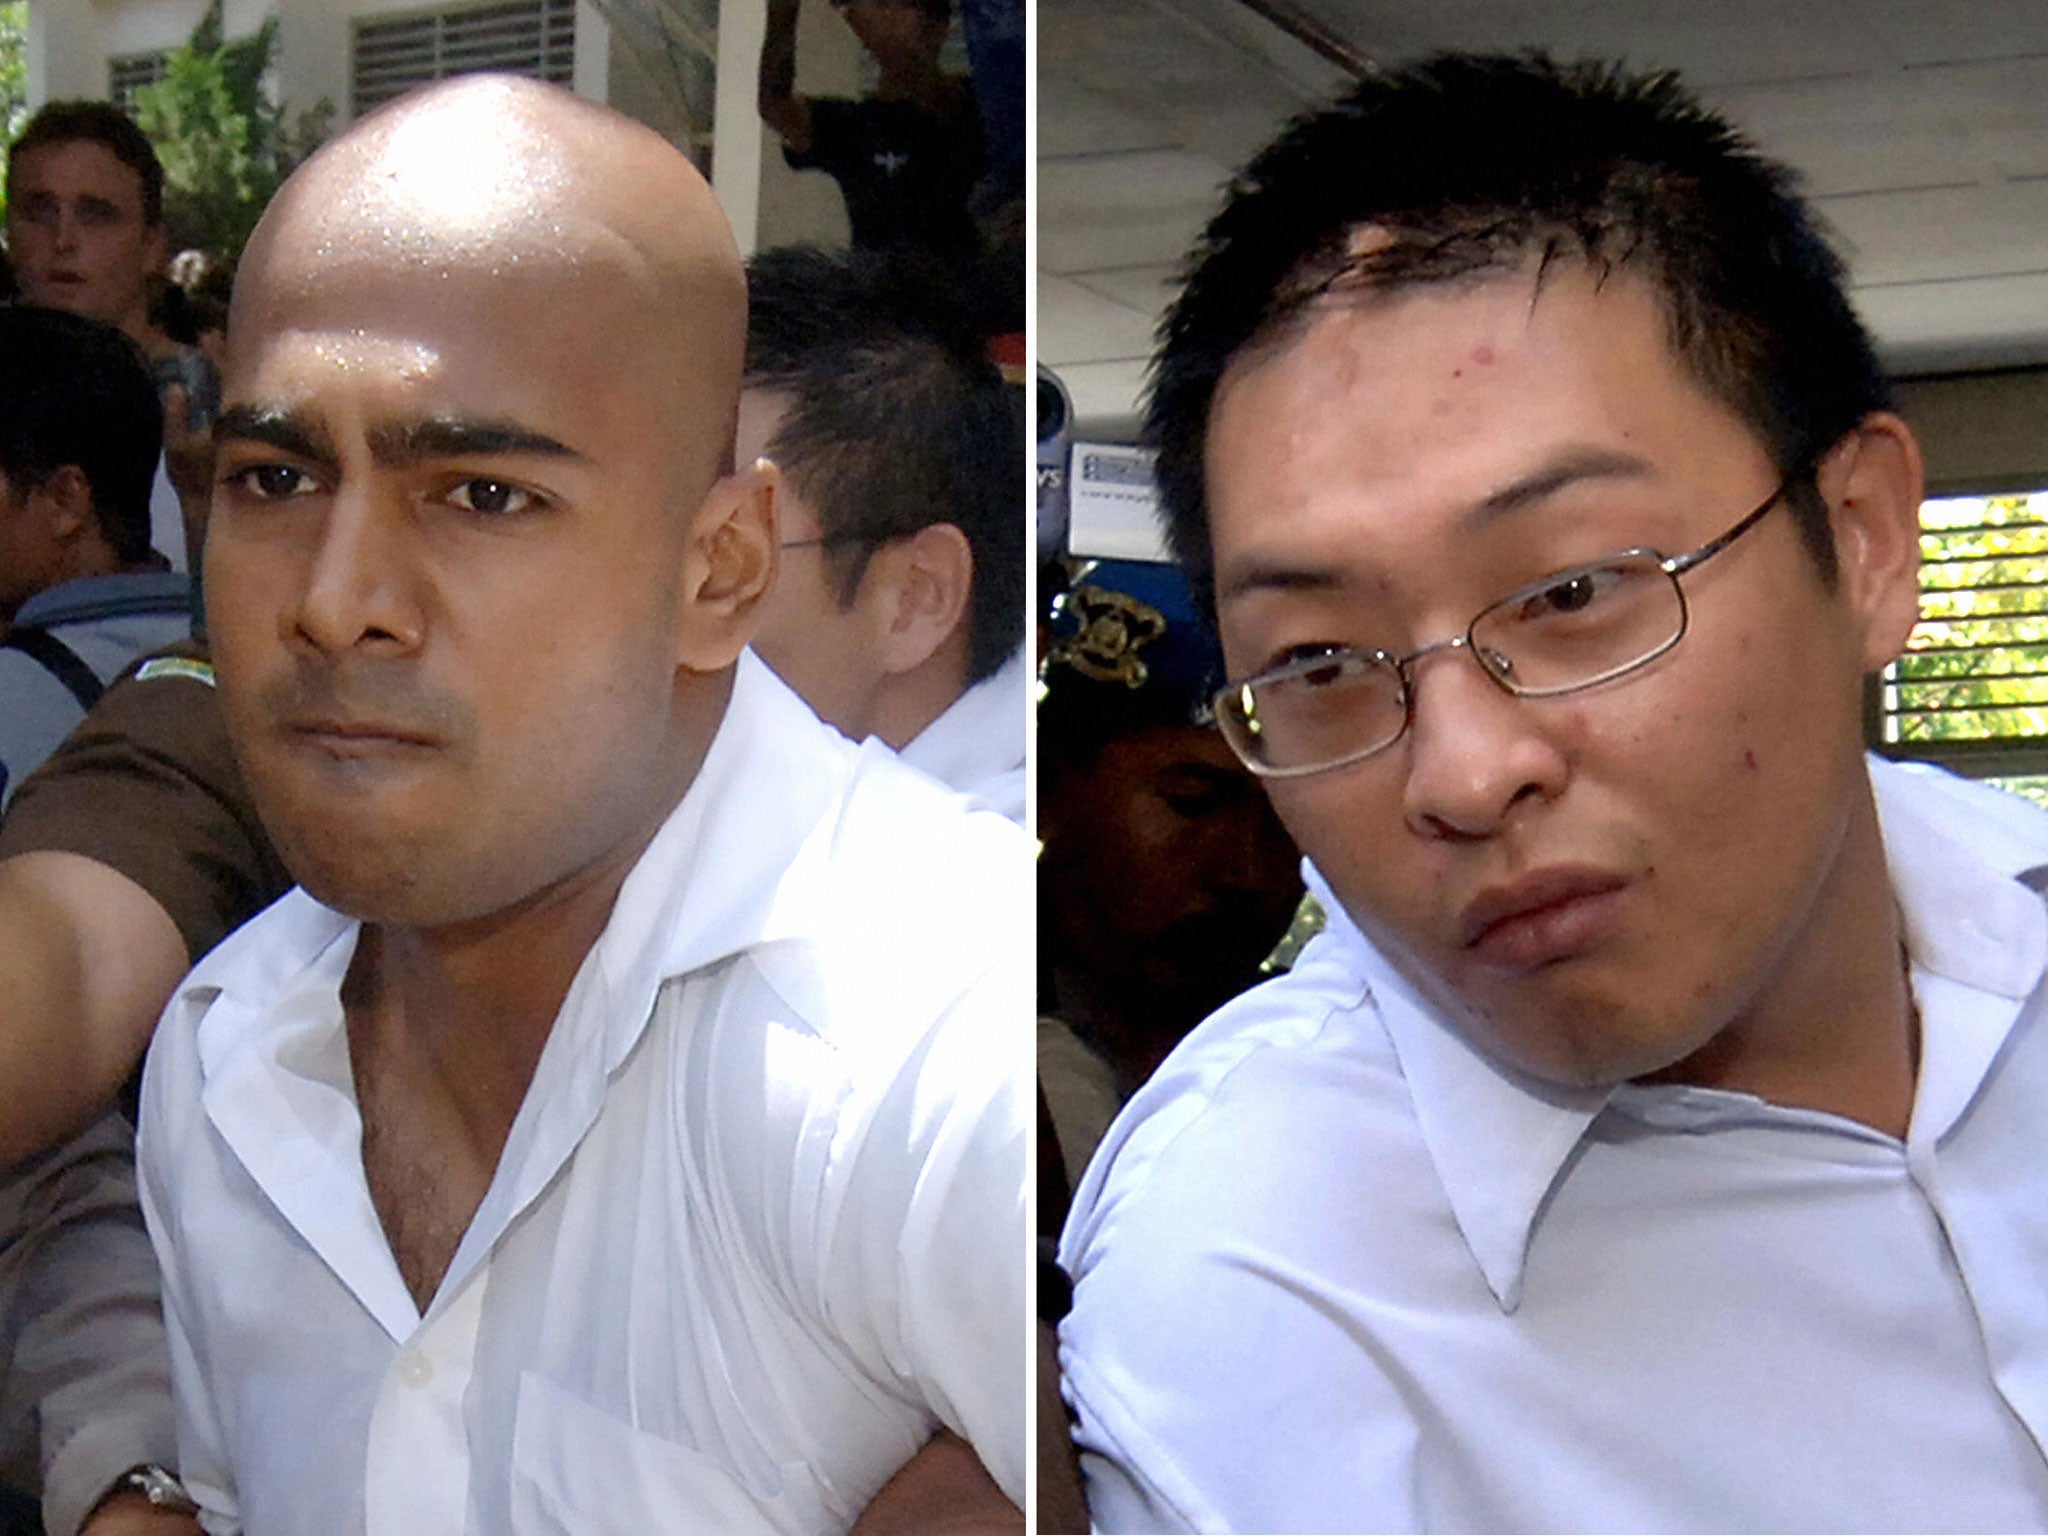 Australians Myuran Sukumaran (left) and Andrew Chan (right). Chan has had his last-ditch legal challenge against his sentence rejected and is expected to be executed by firing squad